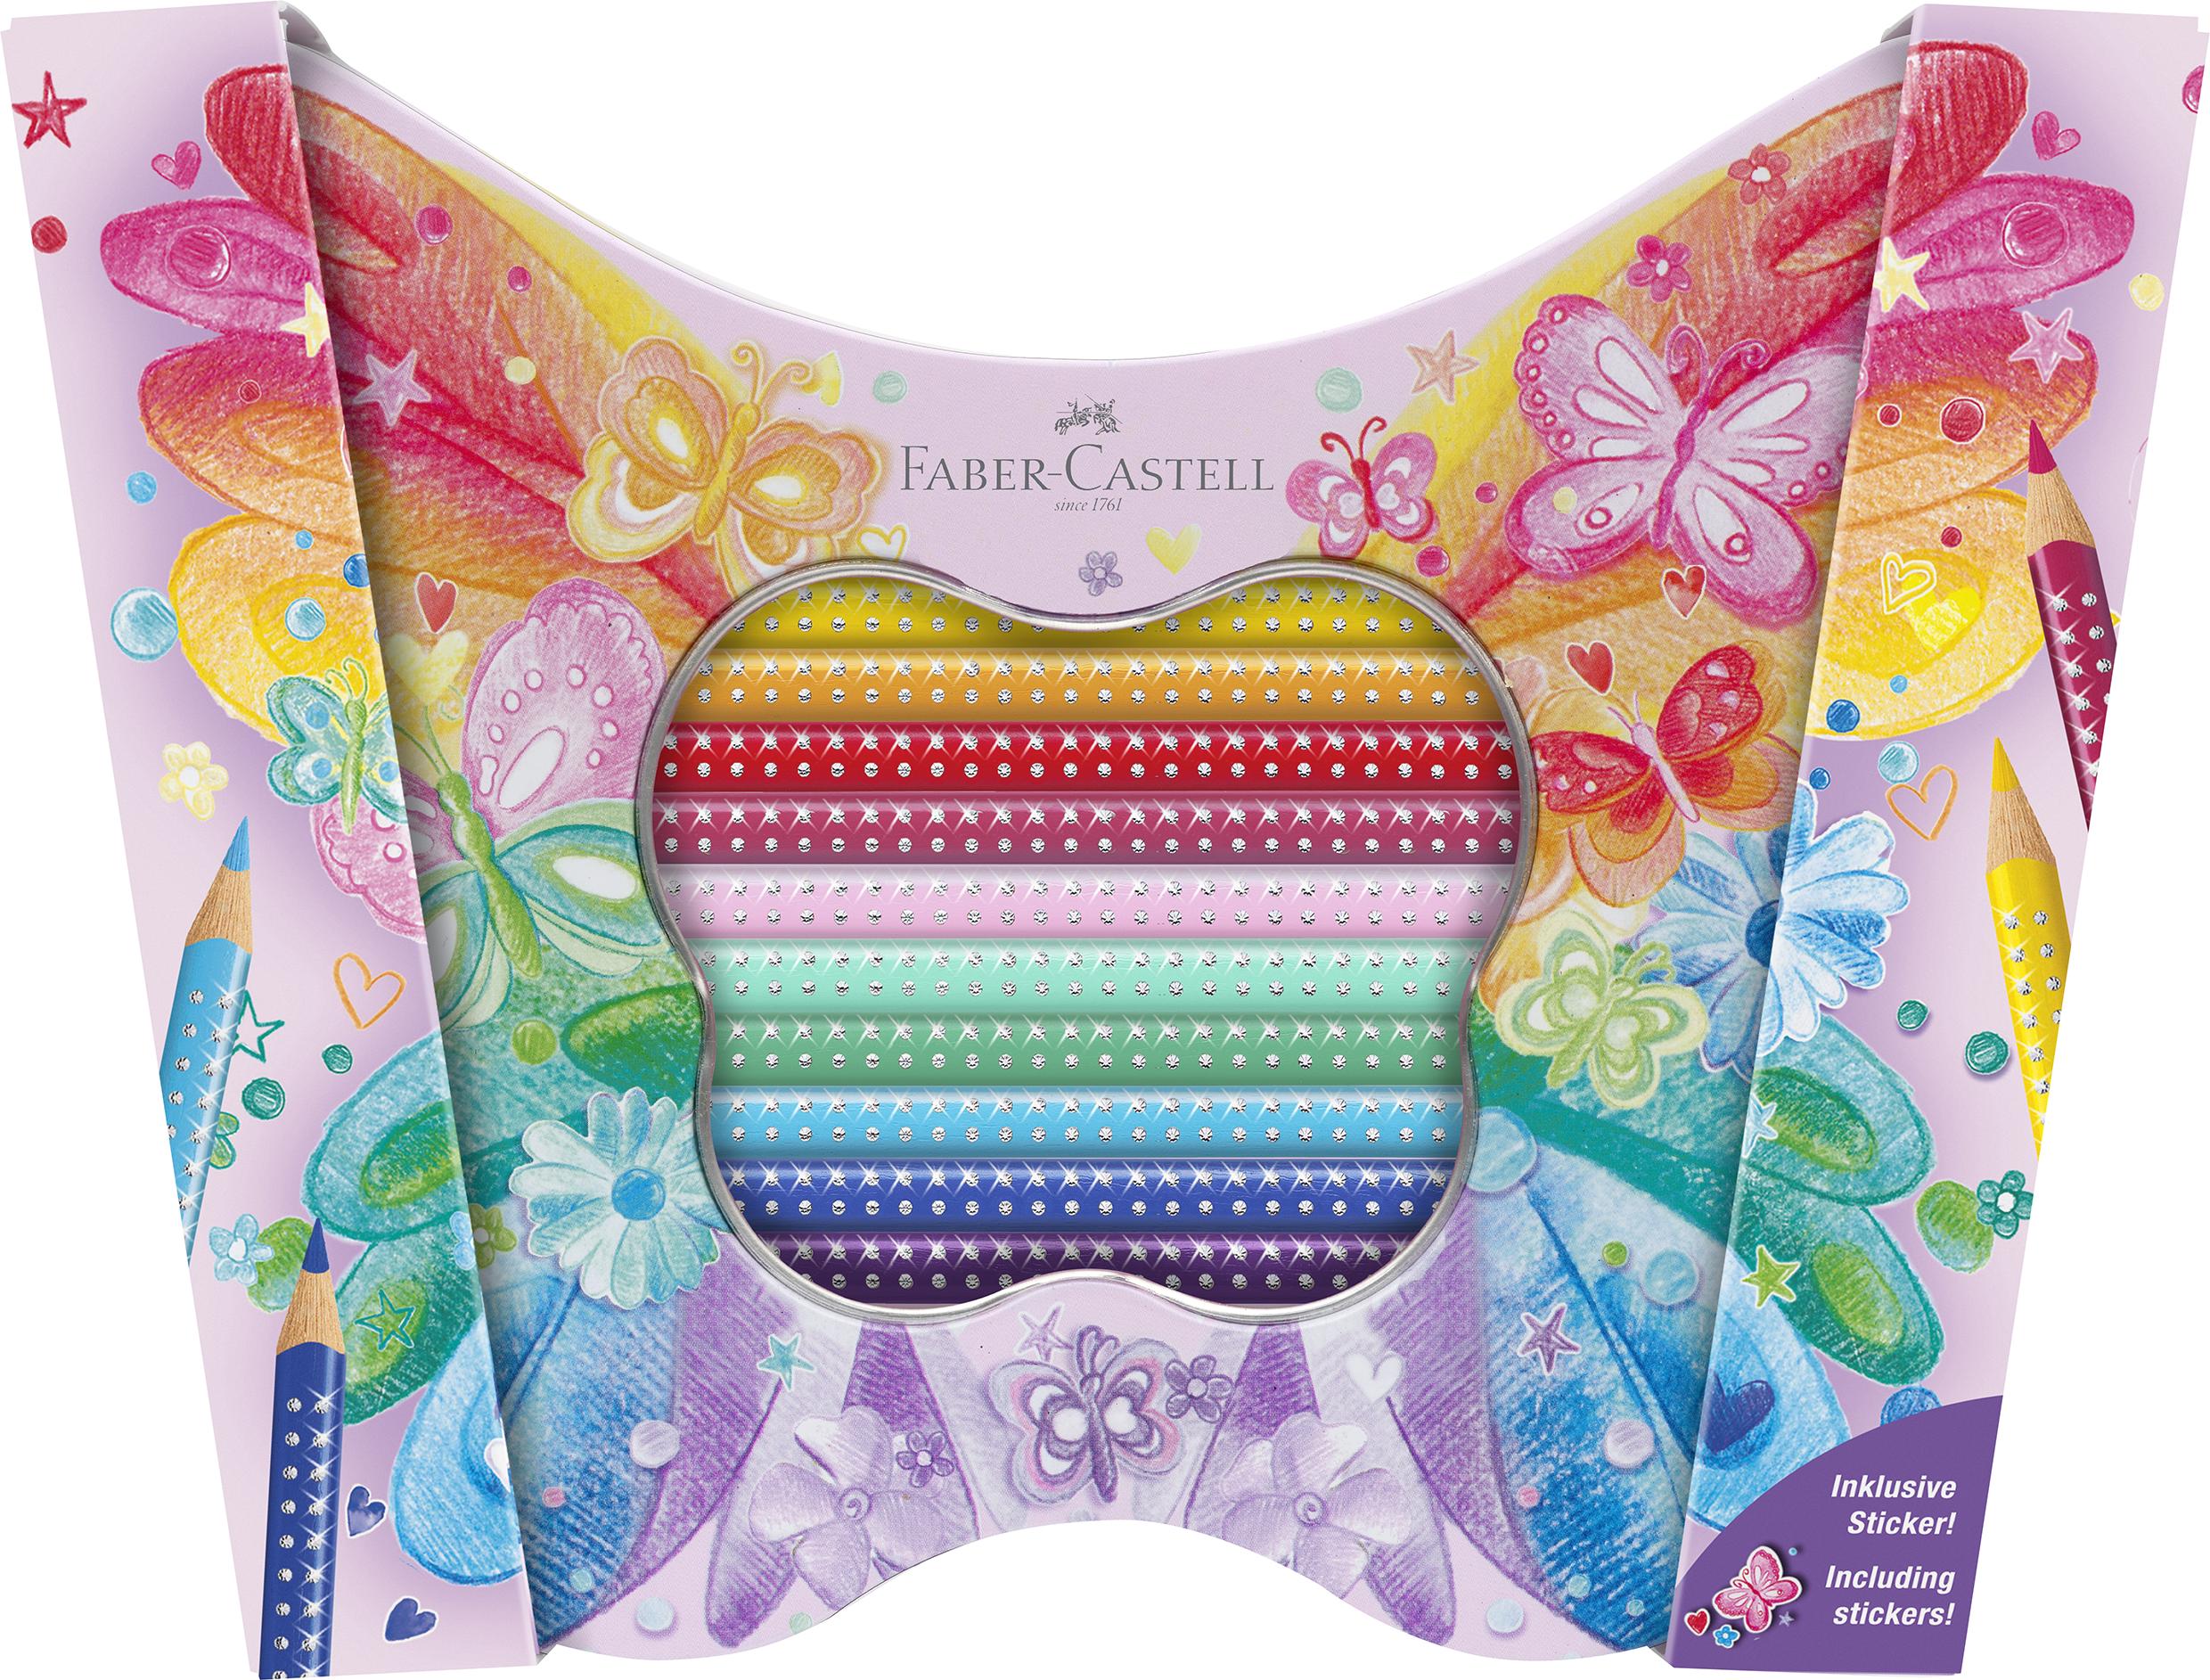 Faber-Castell - Gift set Sparkle color pencils butterfly (201971)